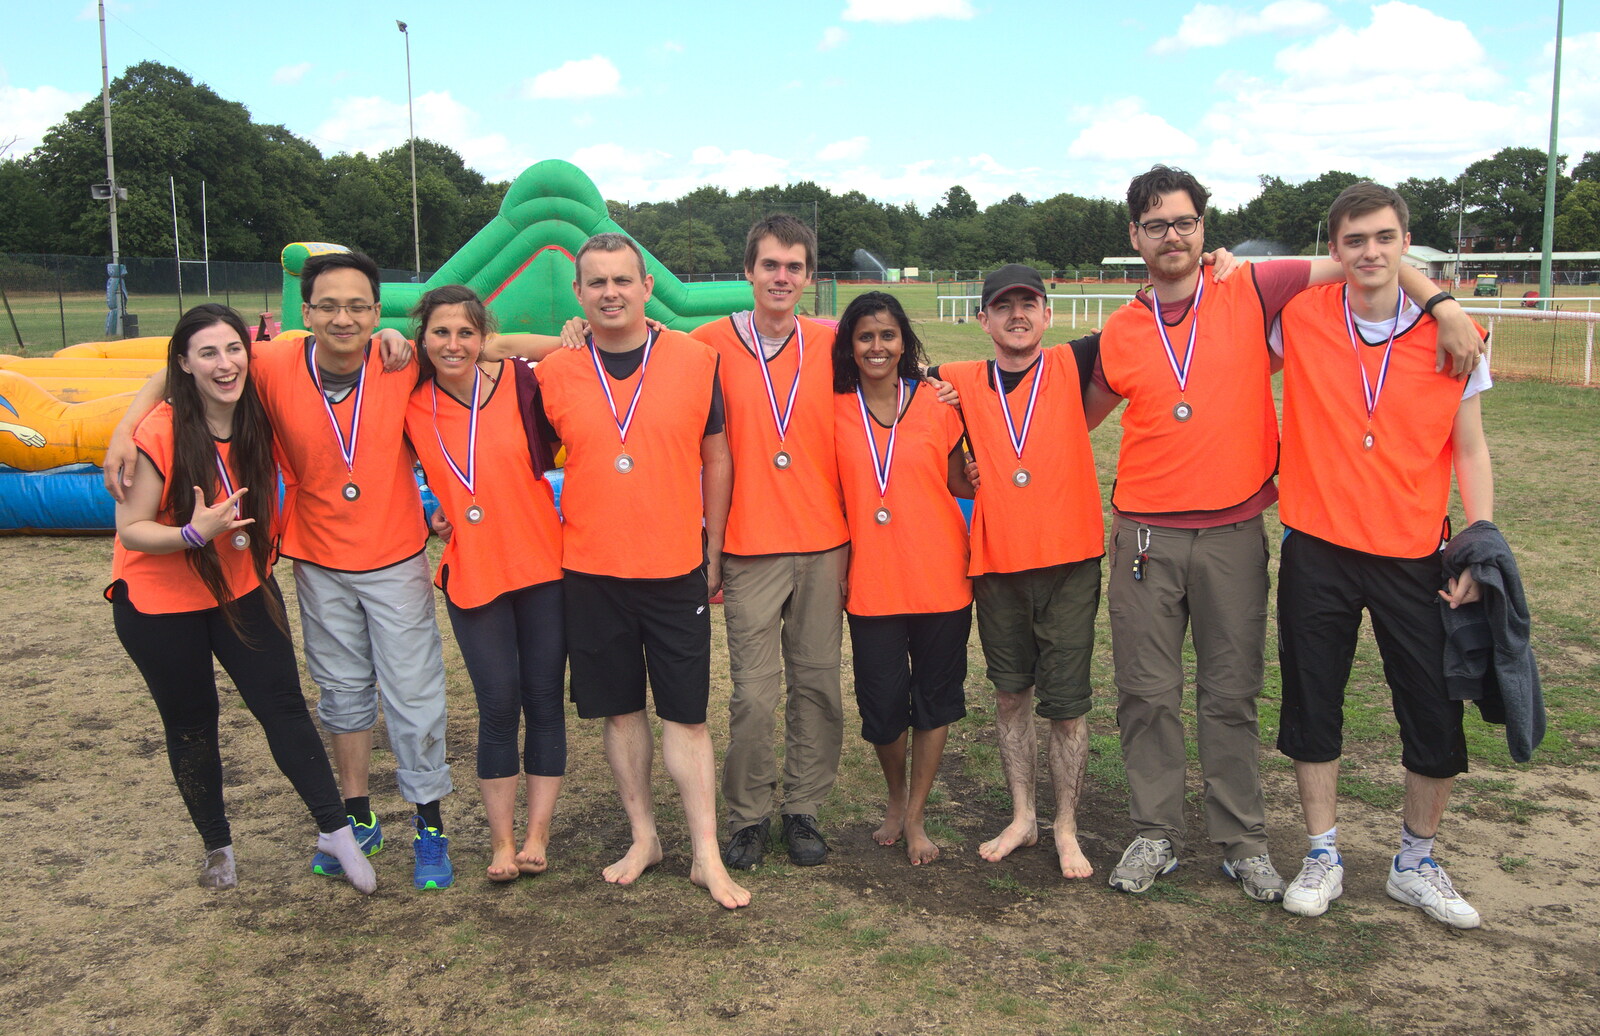 James C and the orange team from It's a SwiftKey Knockout, Richmond Rugby Club, Richmond, Surrey - 7th July 2015